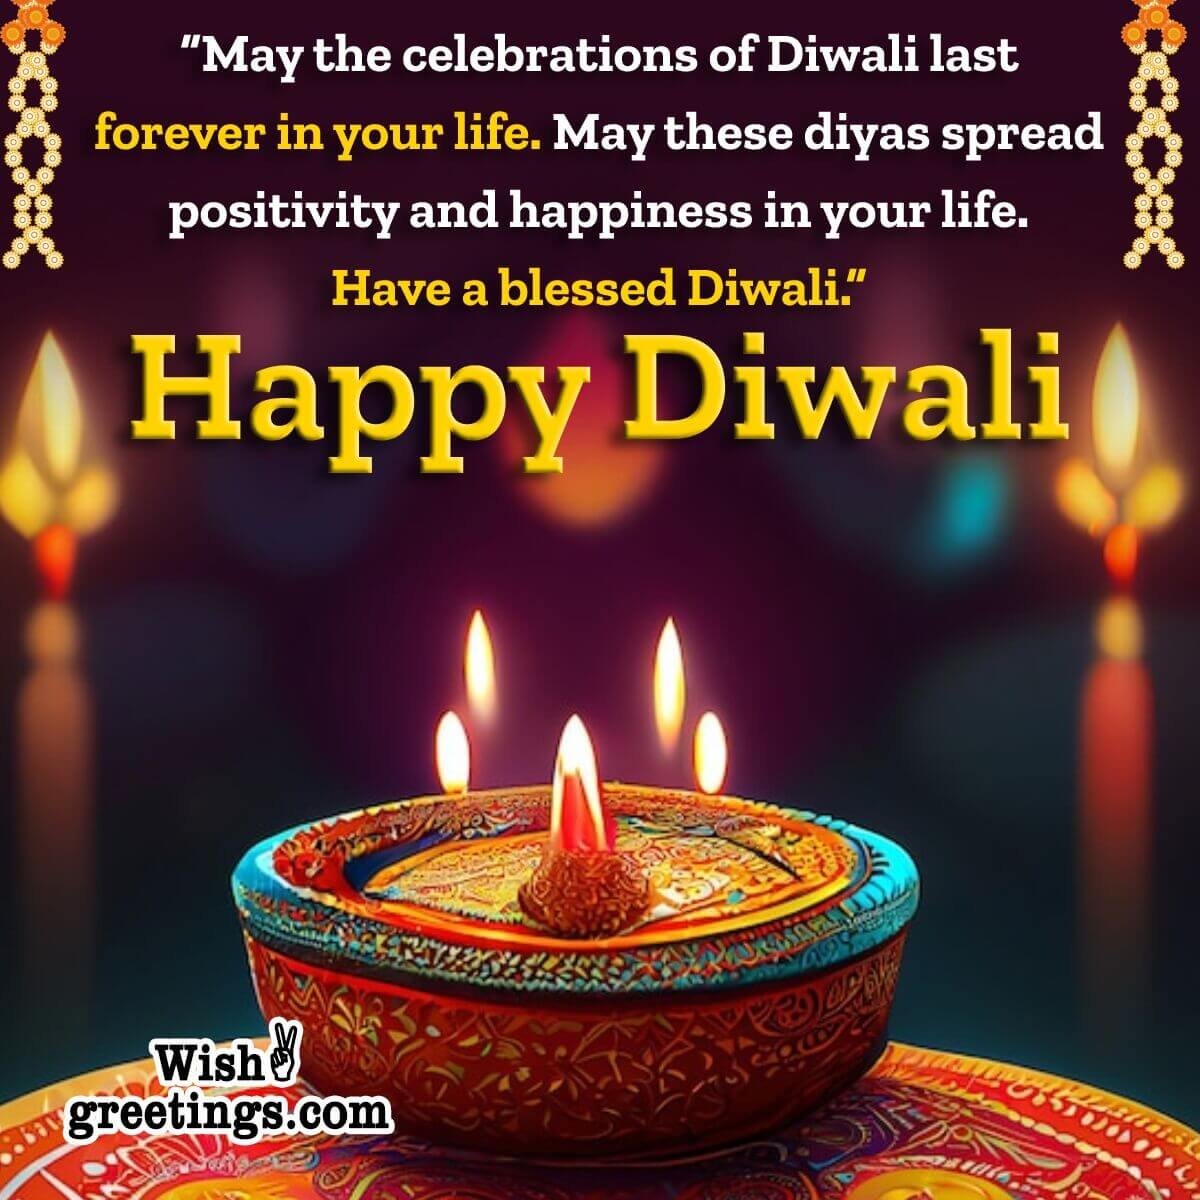 Have A Blessed Diwali